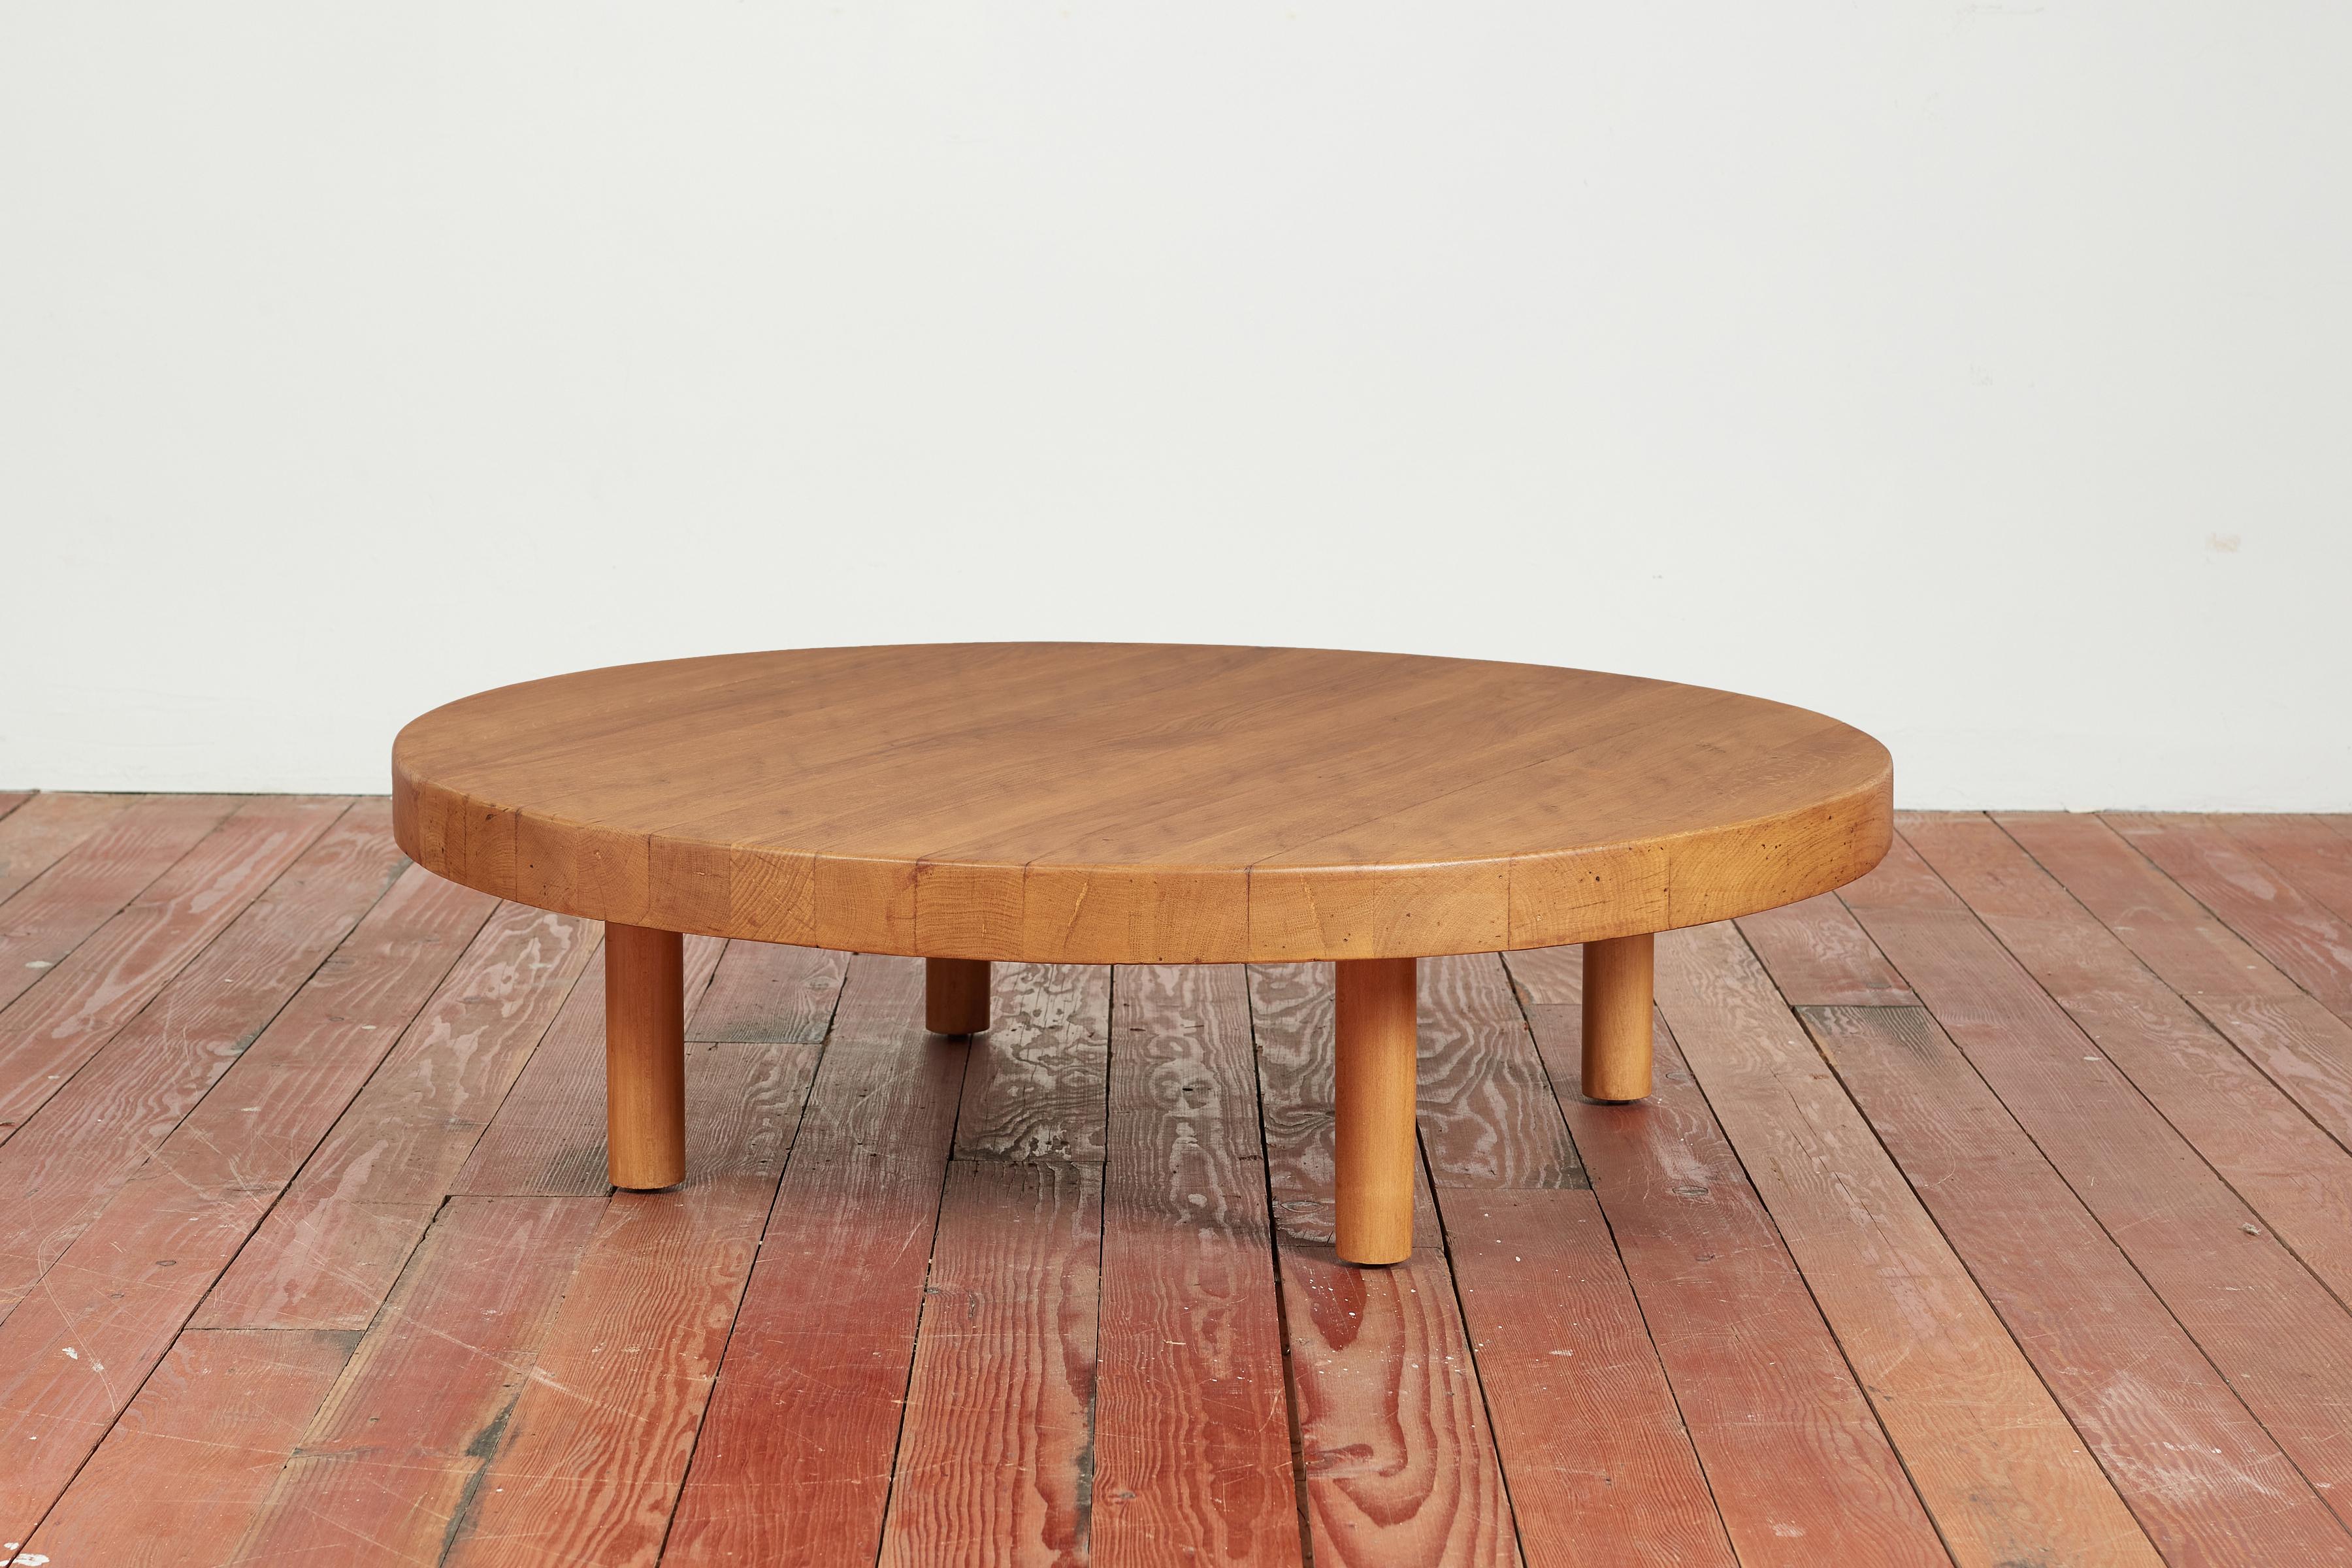 Gorgeous French round oak coffee table with all the right patina in the style of Pierre Chapo. 

Thick oak top with wonderful grain and simple cylinder legs.

France, 1950's